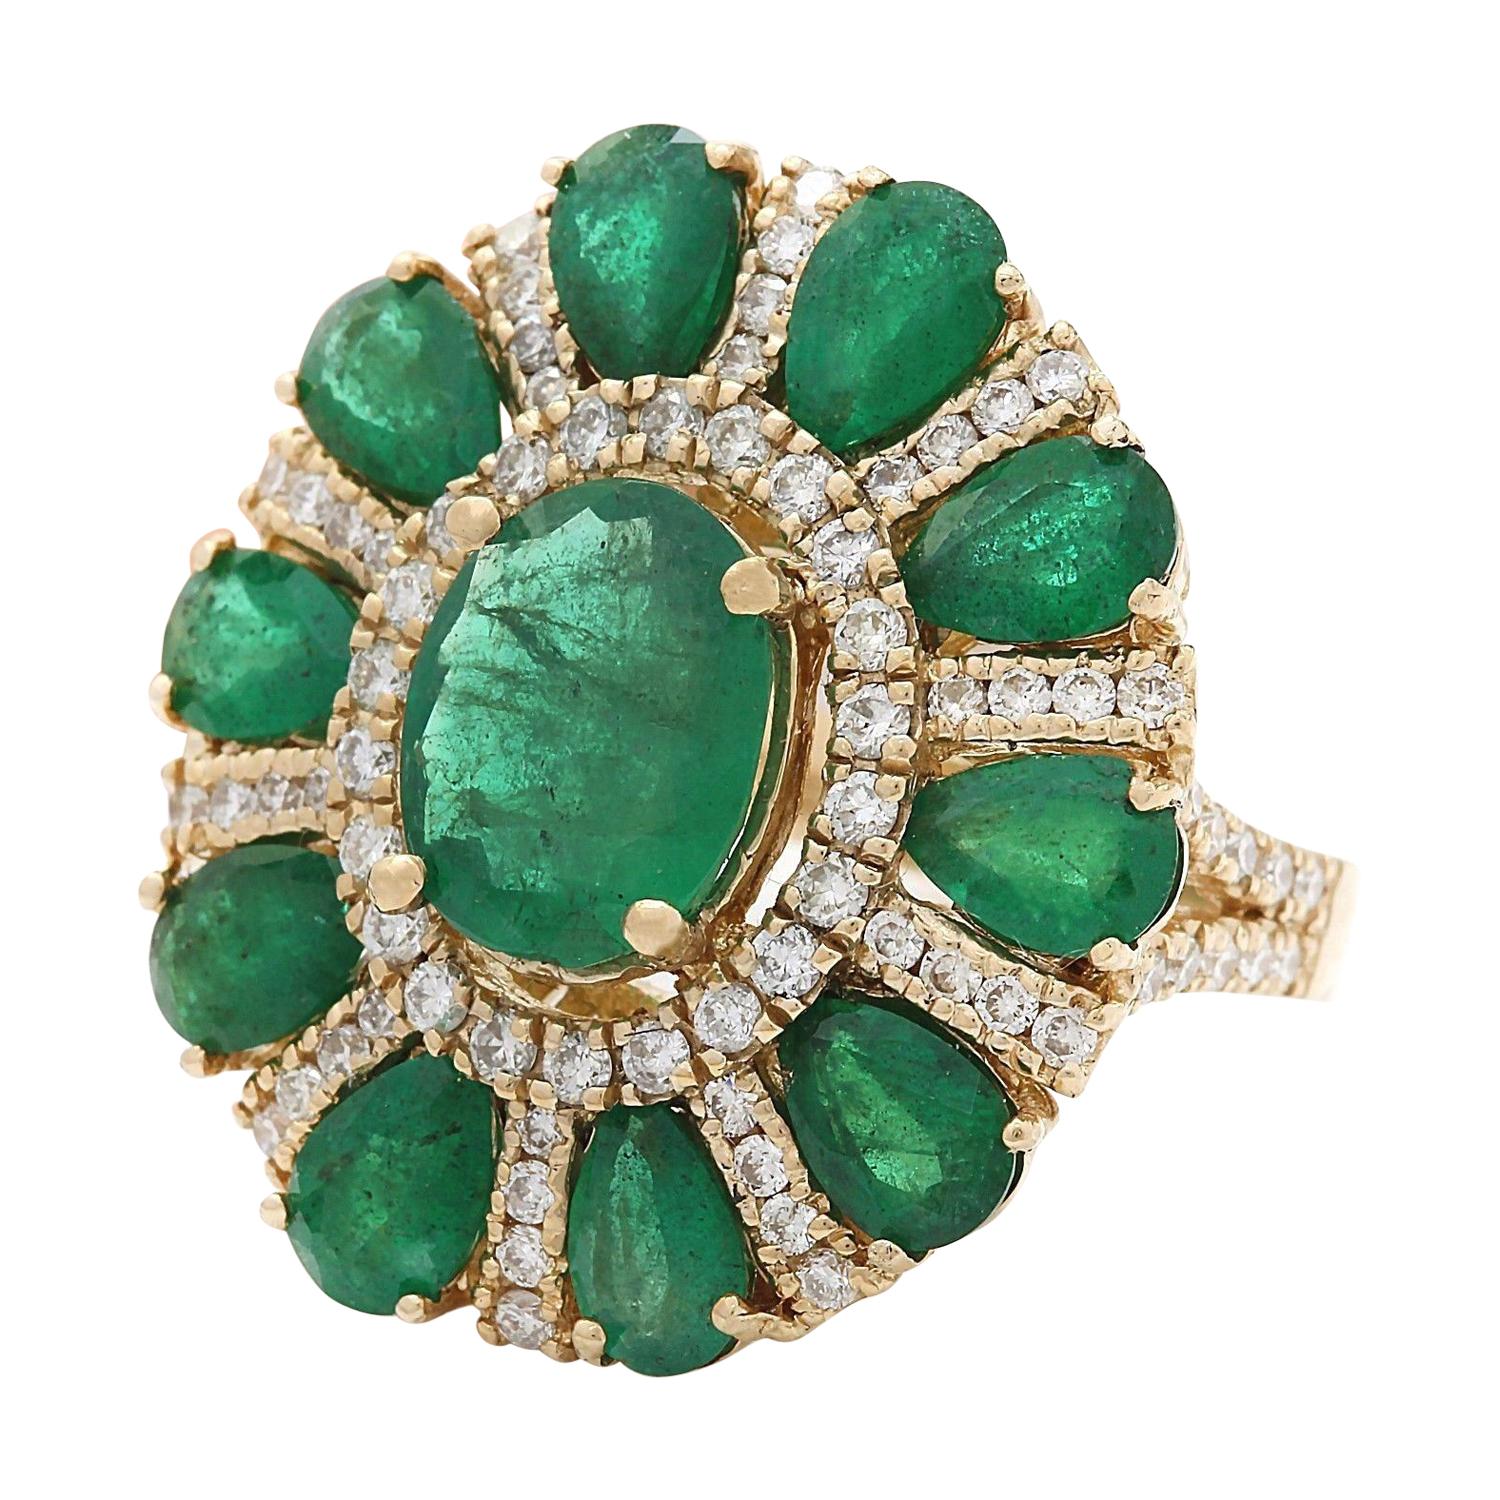 6.39 Carat Natural Emerald 14K Solid Yellow Gold Diamond Ring
 Item Type: Ring
 Item Style: Cocktail
 Material: 14K Yellow Gold
 Mainstone: Emerald
 Stone Color: Green
  CenterStone Weight: 2.10 Carat
  SideStone Weight: 3.34 Carat
 Stone Shape: